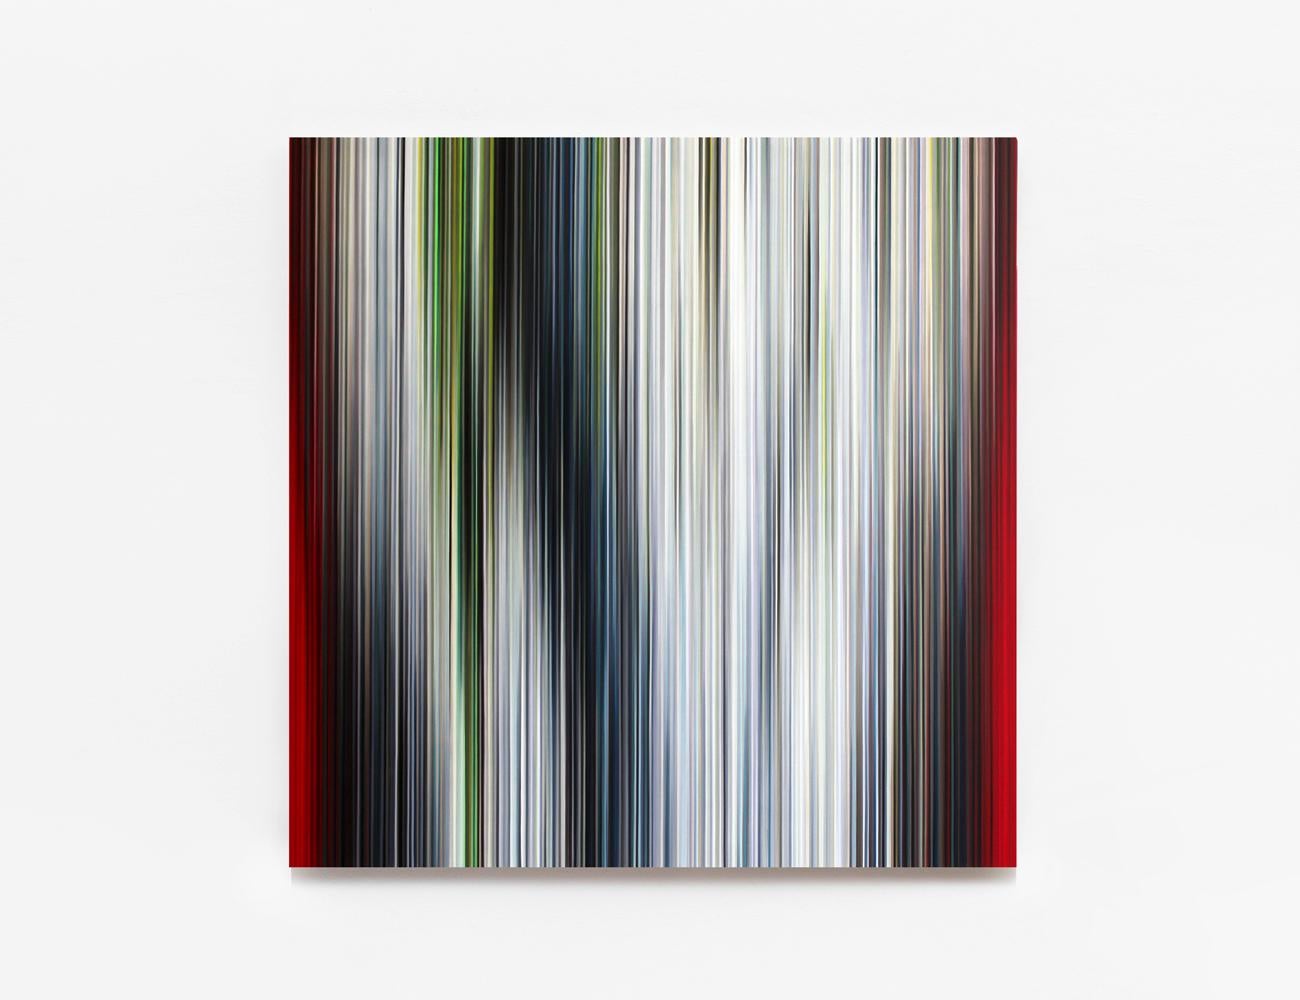 Light'n'Lines No.8 is a unique oil on Alu-Dibond painting by contemporary artist Doris Marten, dimensions are 80 × 80 cm (31.5 × 31.5 in).
The artwork is signed, sold unframed and comes with a certificate of authenticity.

The visual effects